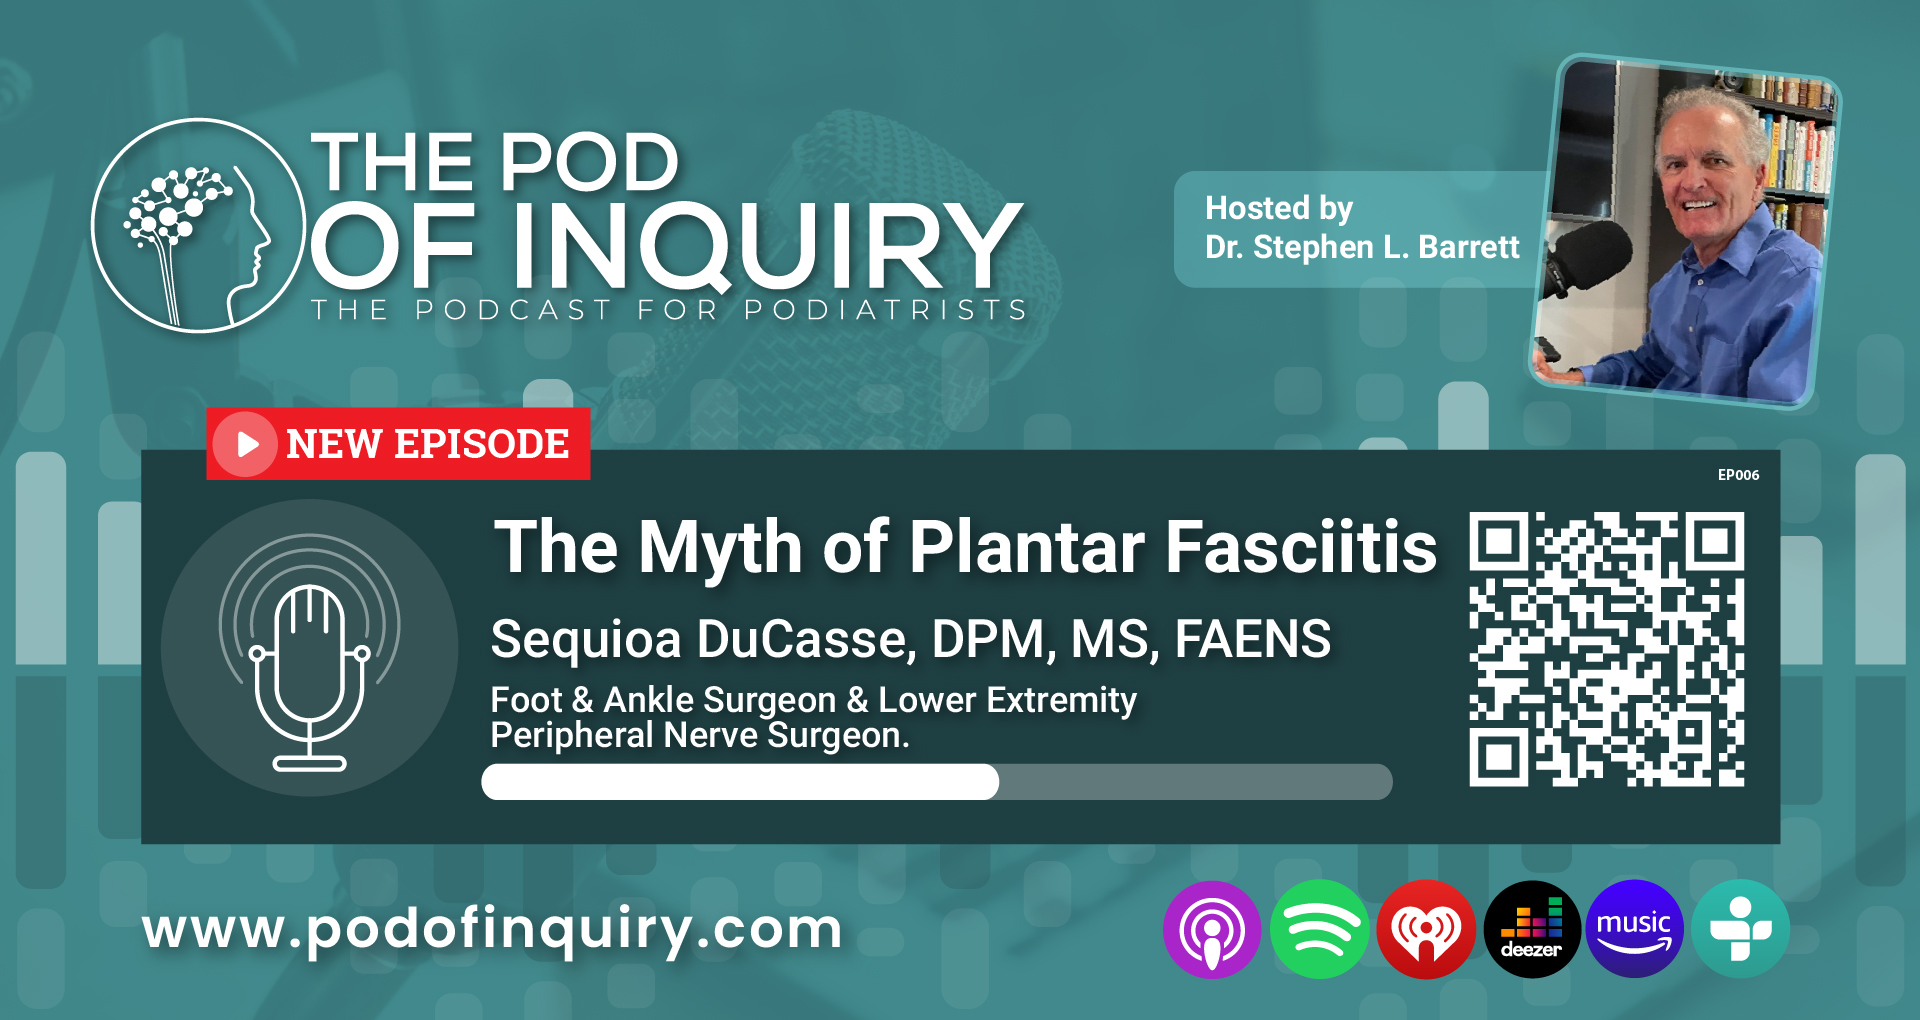 The Myth of Plantar Fasciitis with Dr. Sequioa DuCasse